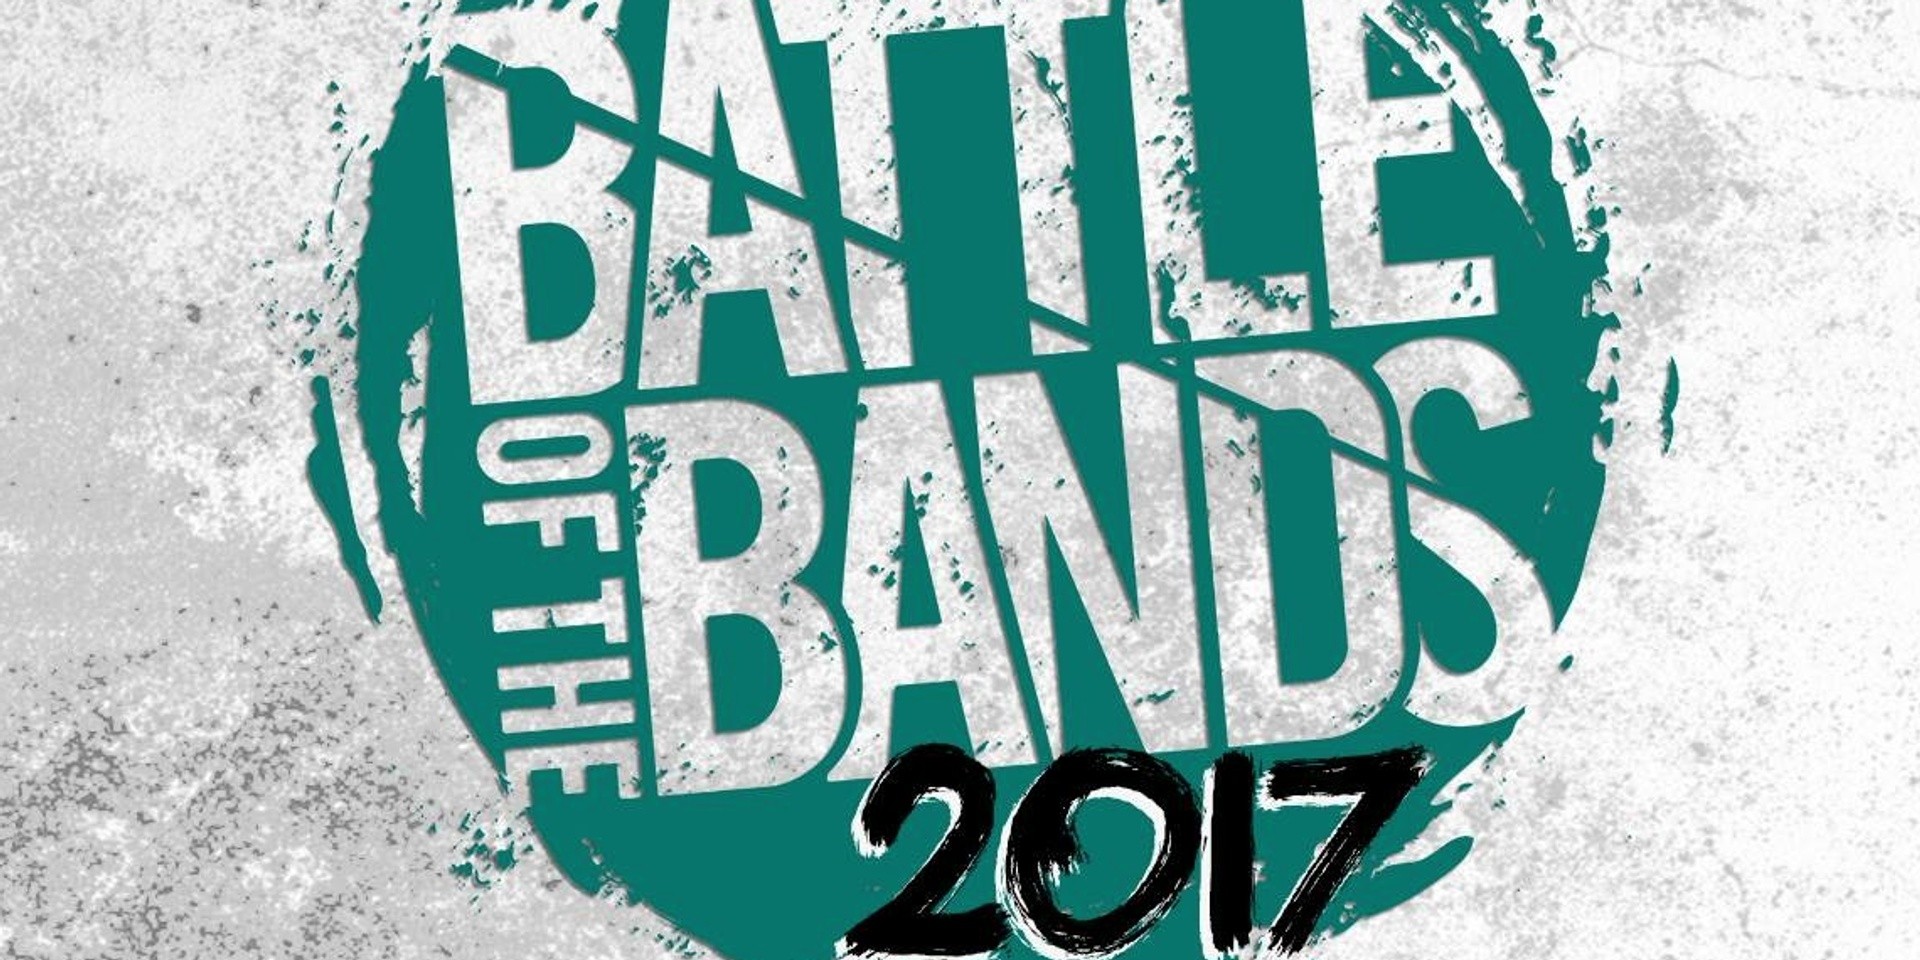 Yellow Room Music announces Top 10 finalists for this year's Battle of the Bands